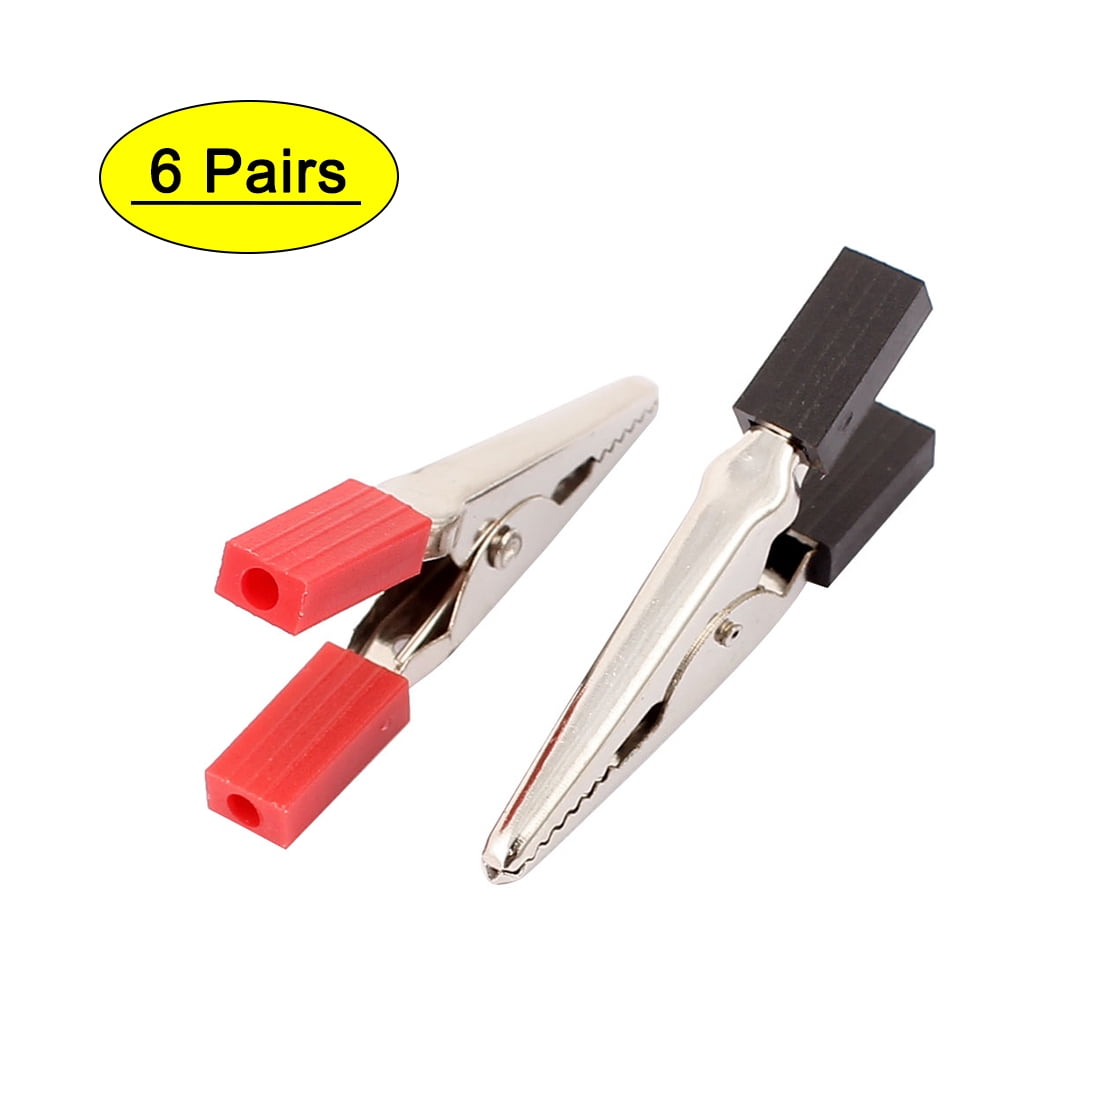 Uxcell a14062400ux0715 25 Pcs Silver Tone Metal Alligator Clip Crocodile Clamps Pack of 25